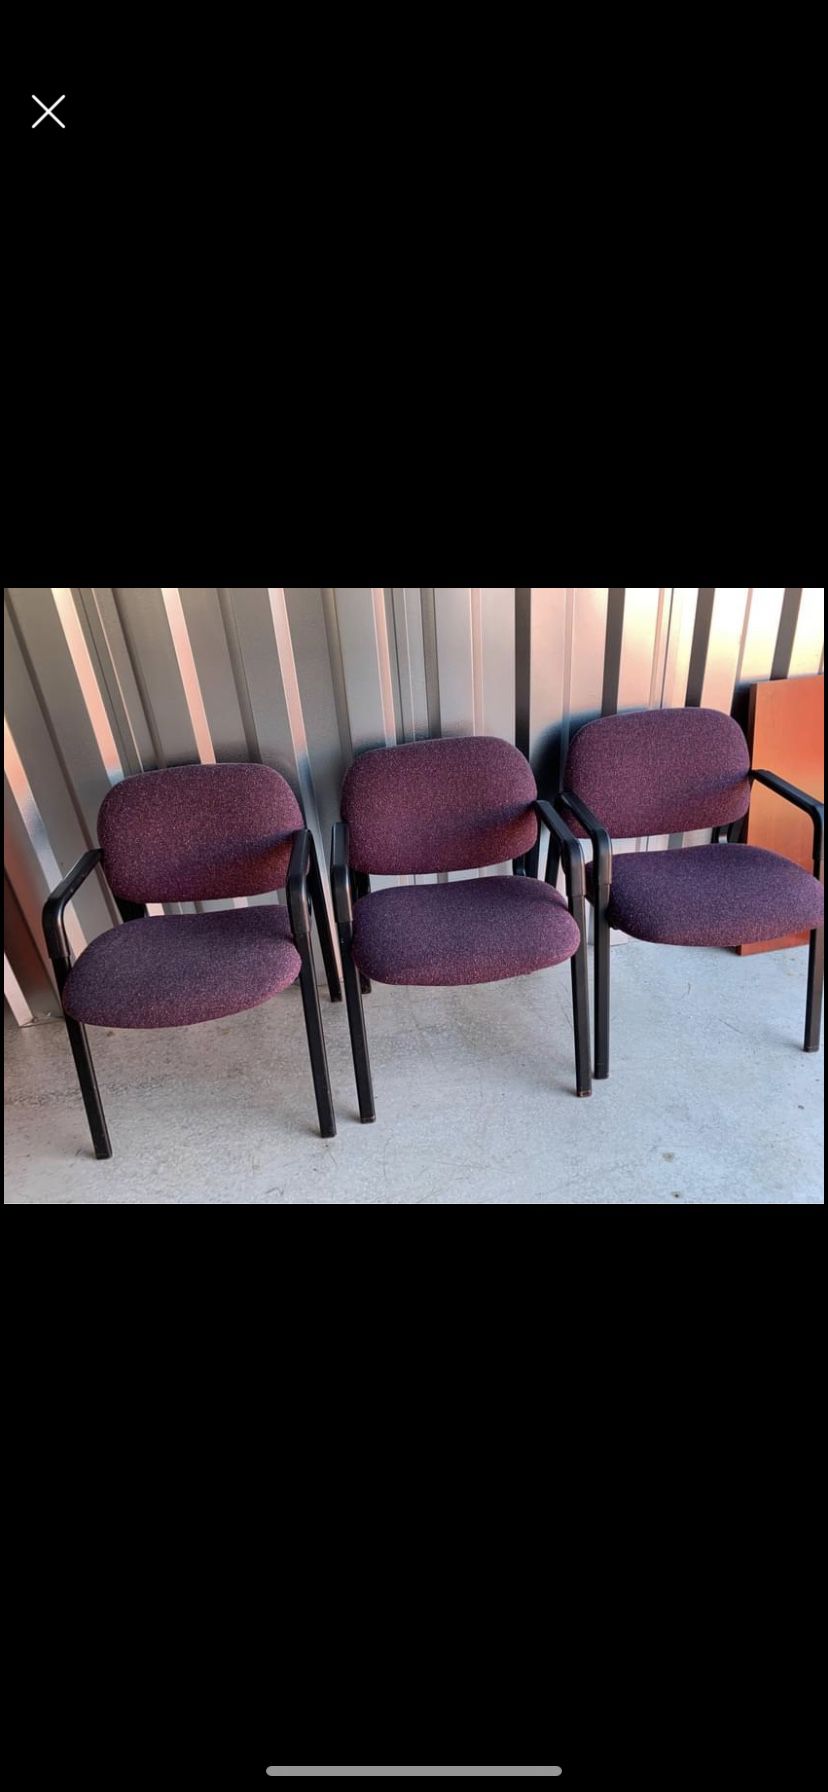 Office chairs Each $20